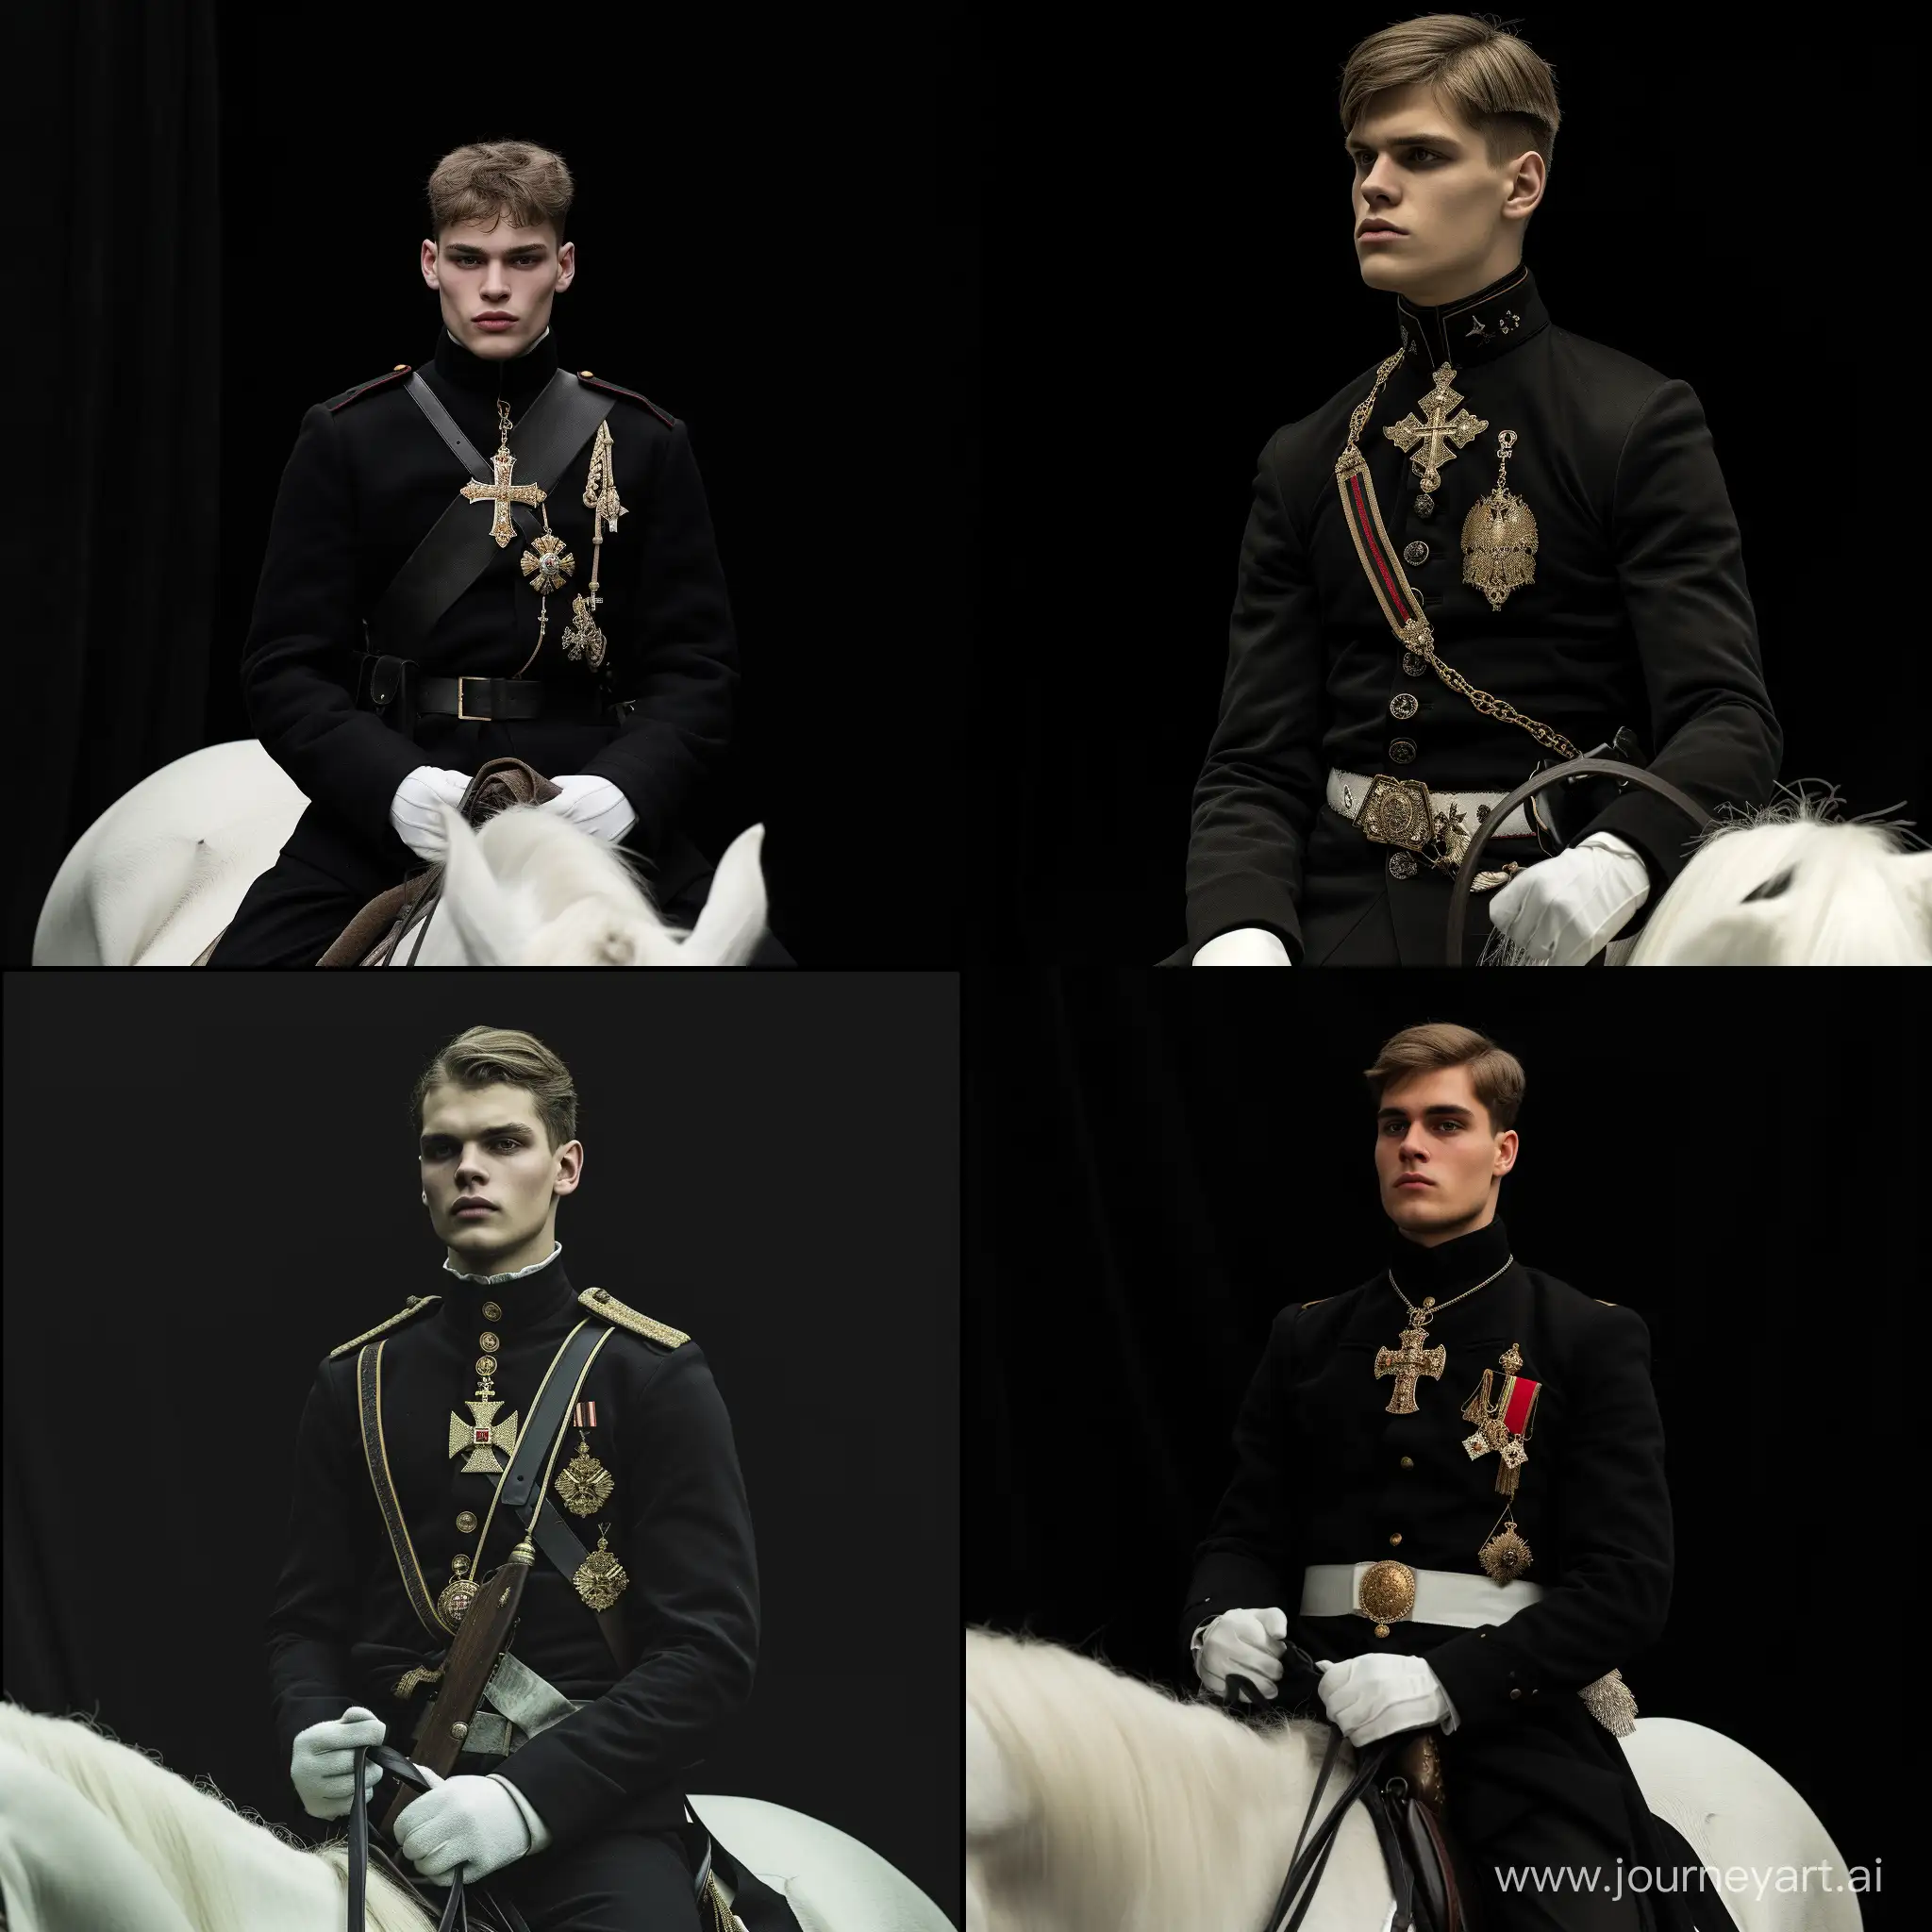 A sophisticated, realistic 4k cinematic photo,young adult, Not a mature 17 years old. European appearance with classical medium length haircut. He's wearing the ceremonial uniform of Nicholas II, black suit, around his neck cross of St George. In his right hand is a sable. He is sitting on a white horse, The background is a solid black colour. Cinematographic image. The backdrop is a black colour. 